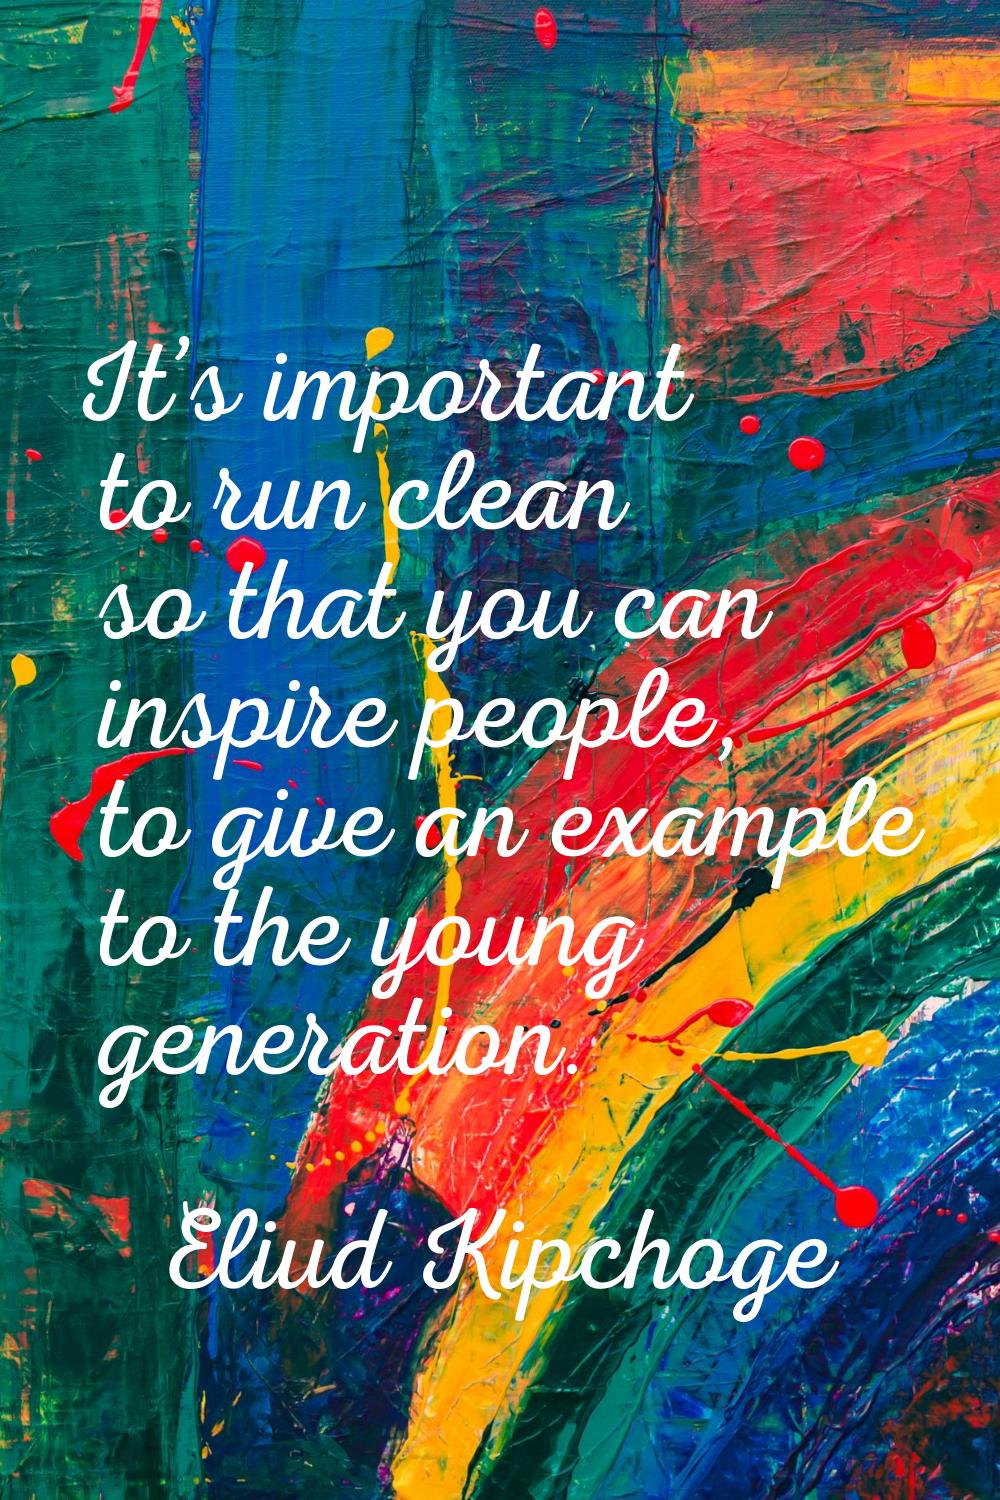 It’s important to run clean so that you can inspire people, to give an example to the young generat